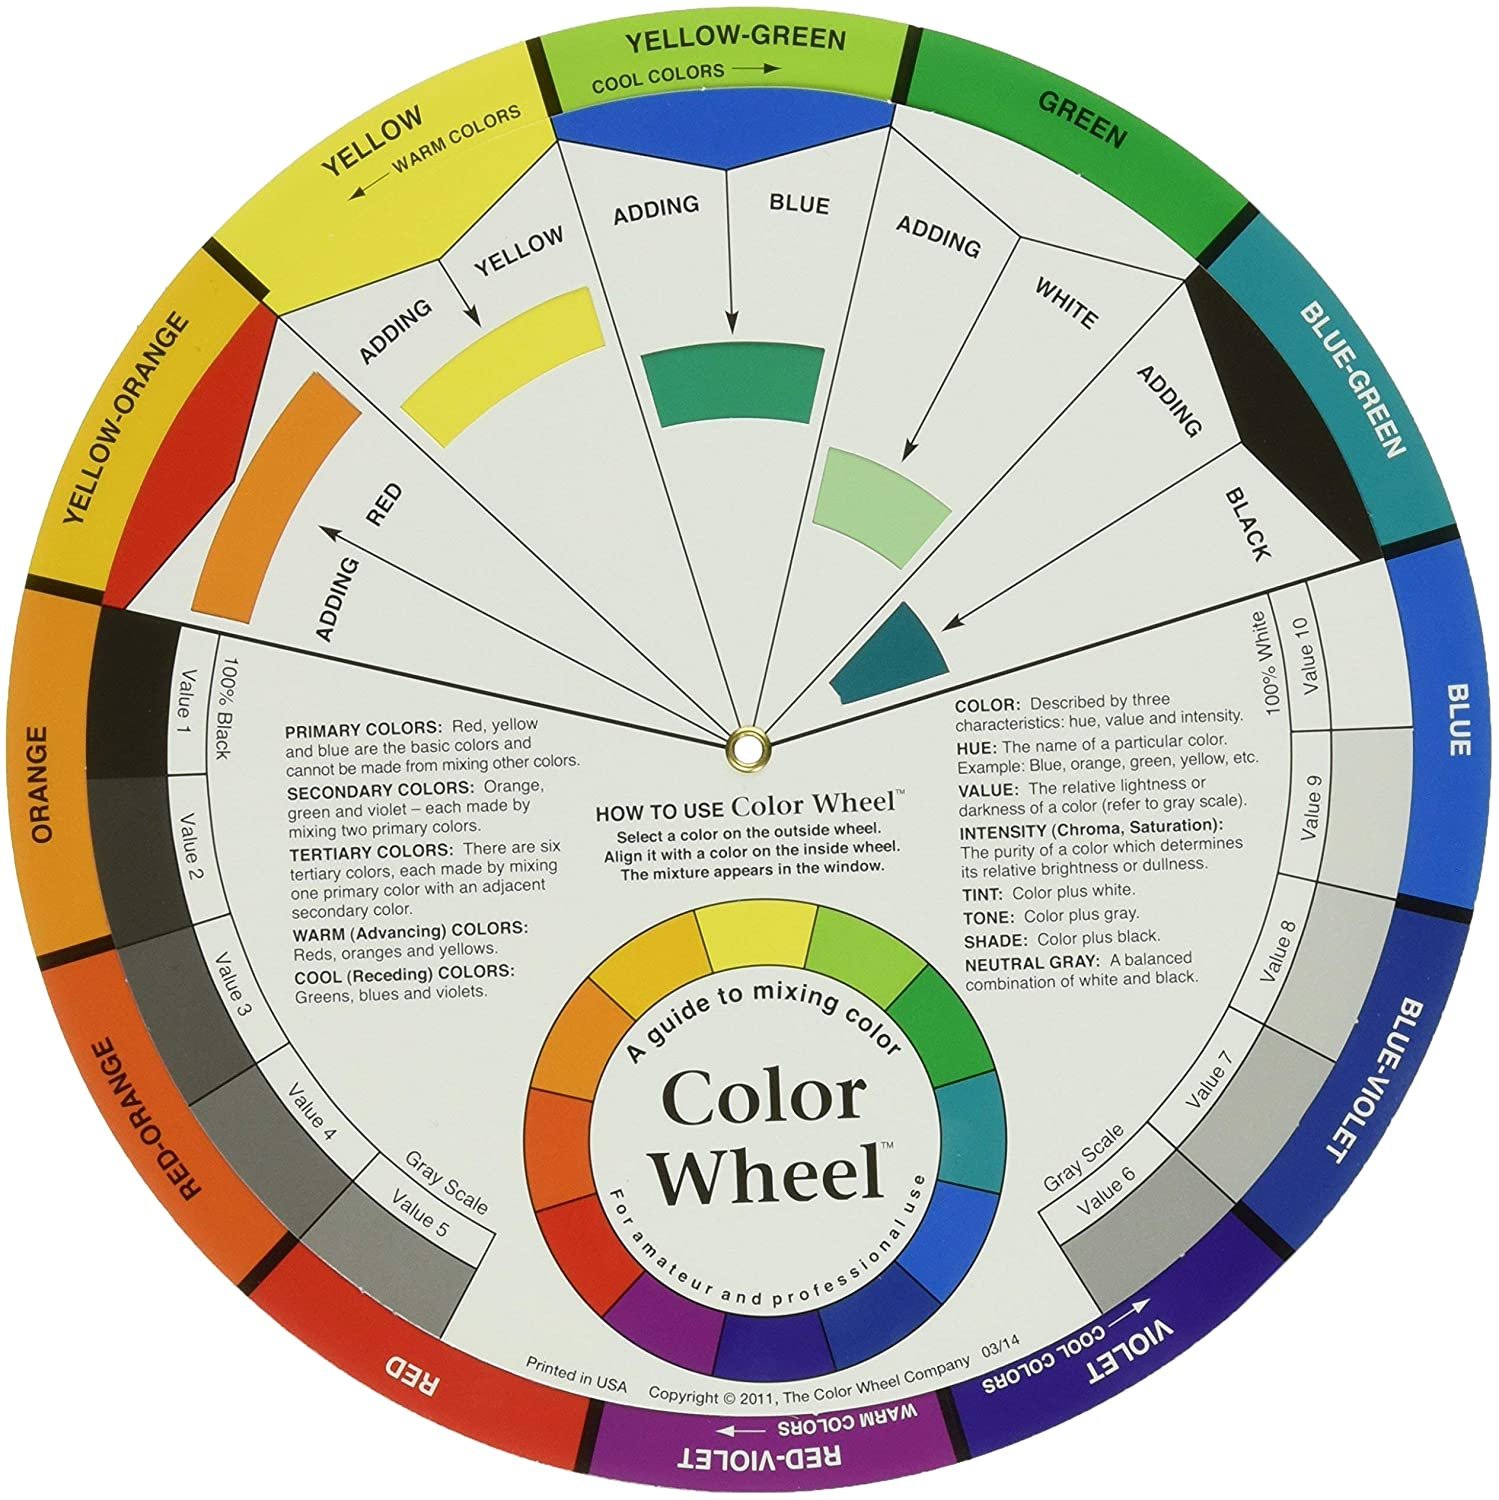 COLOR WHEEL (front)